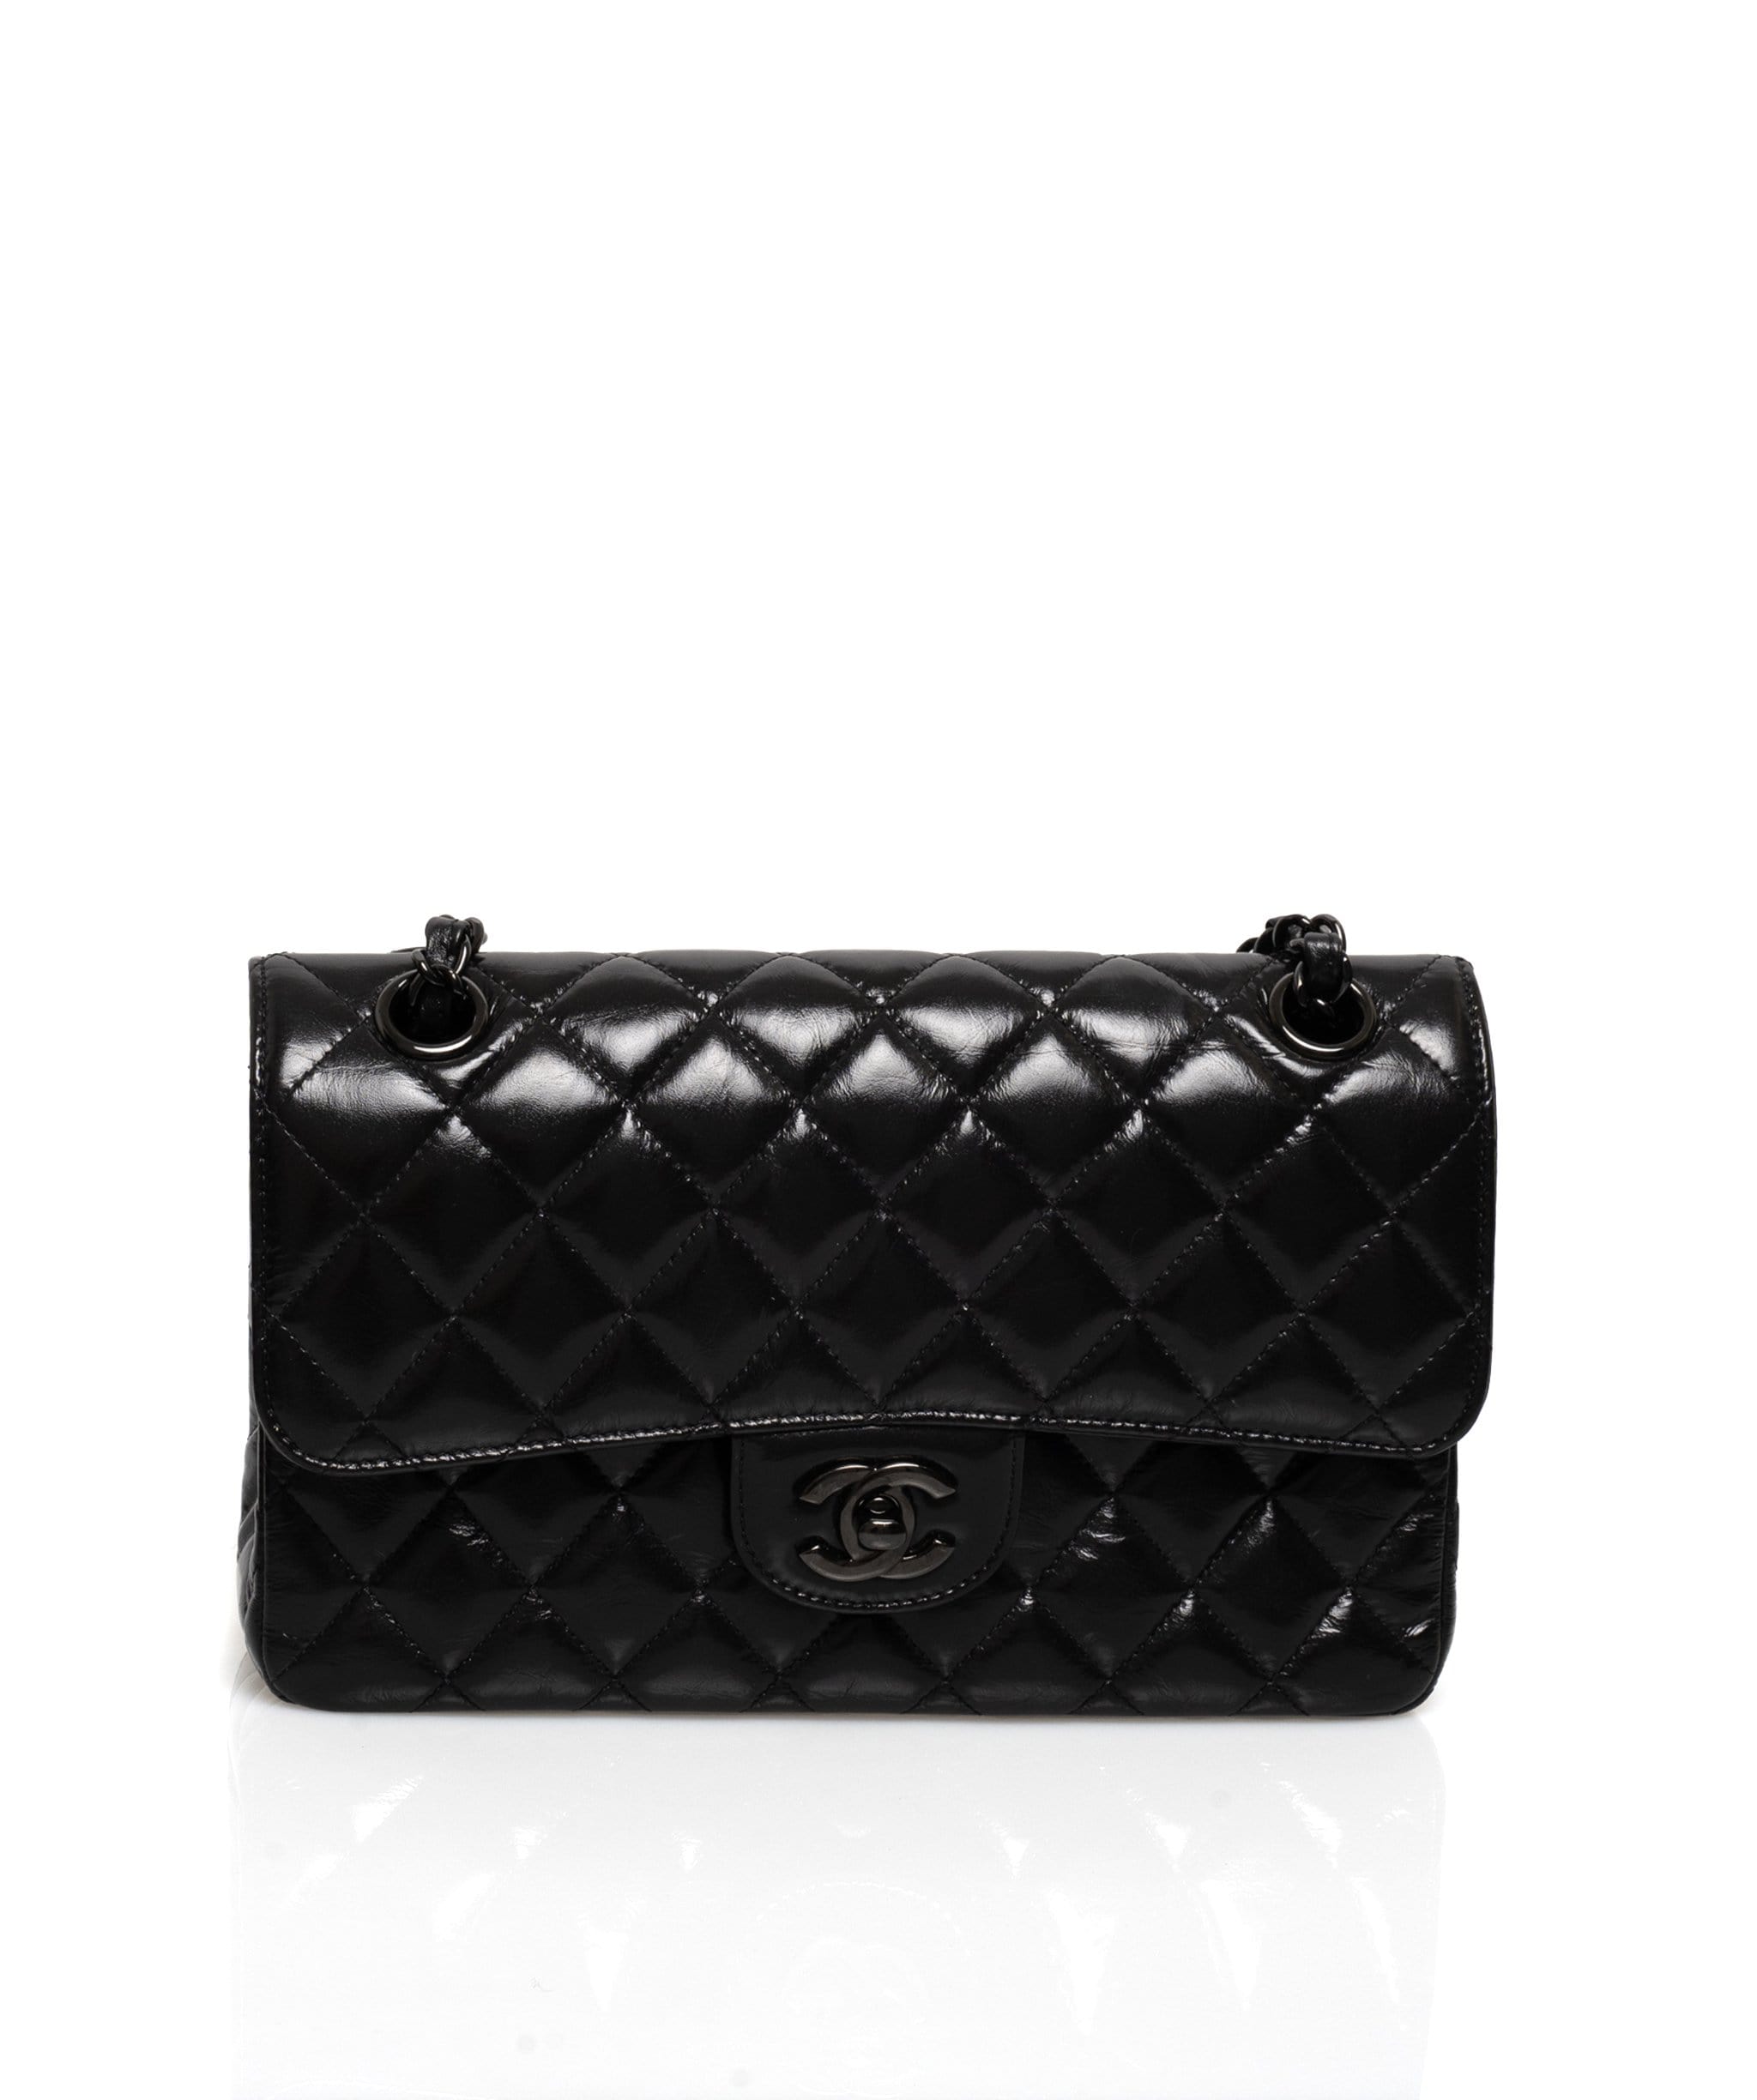 Vintage and Musthaves. Chanel black medium double flap bag Paris limited  edition